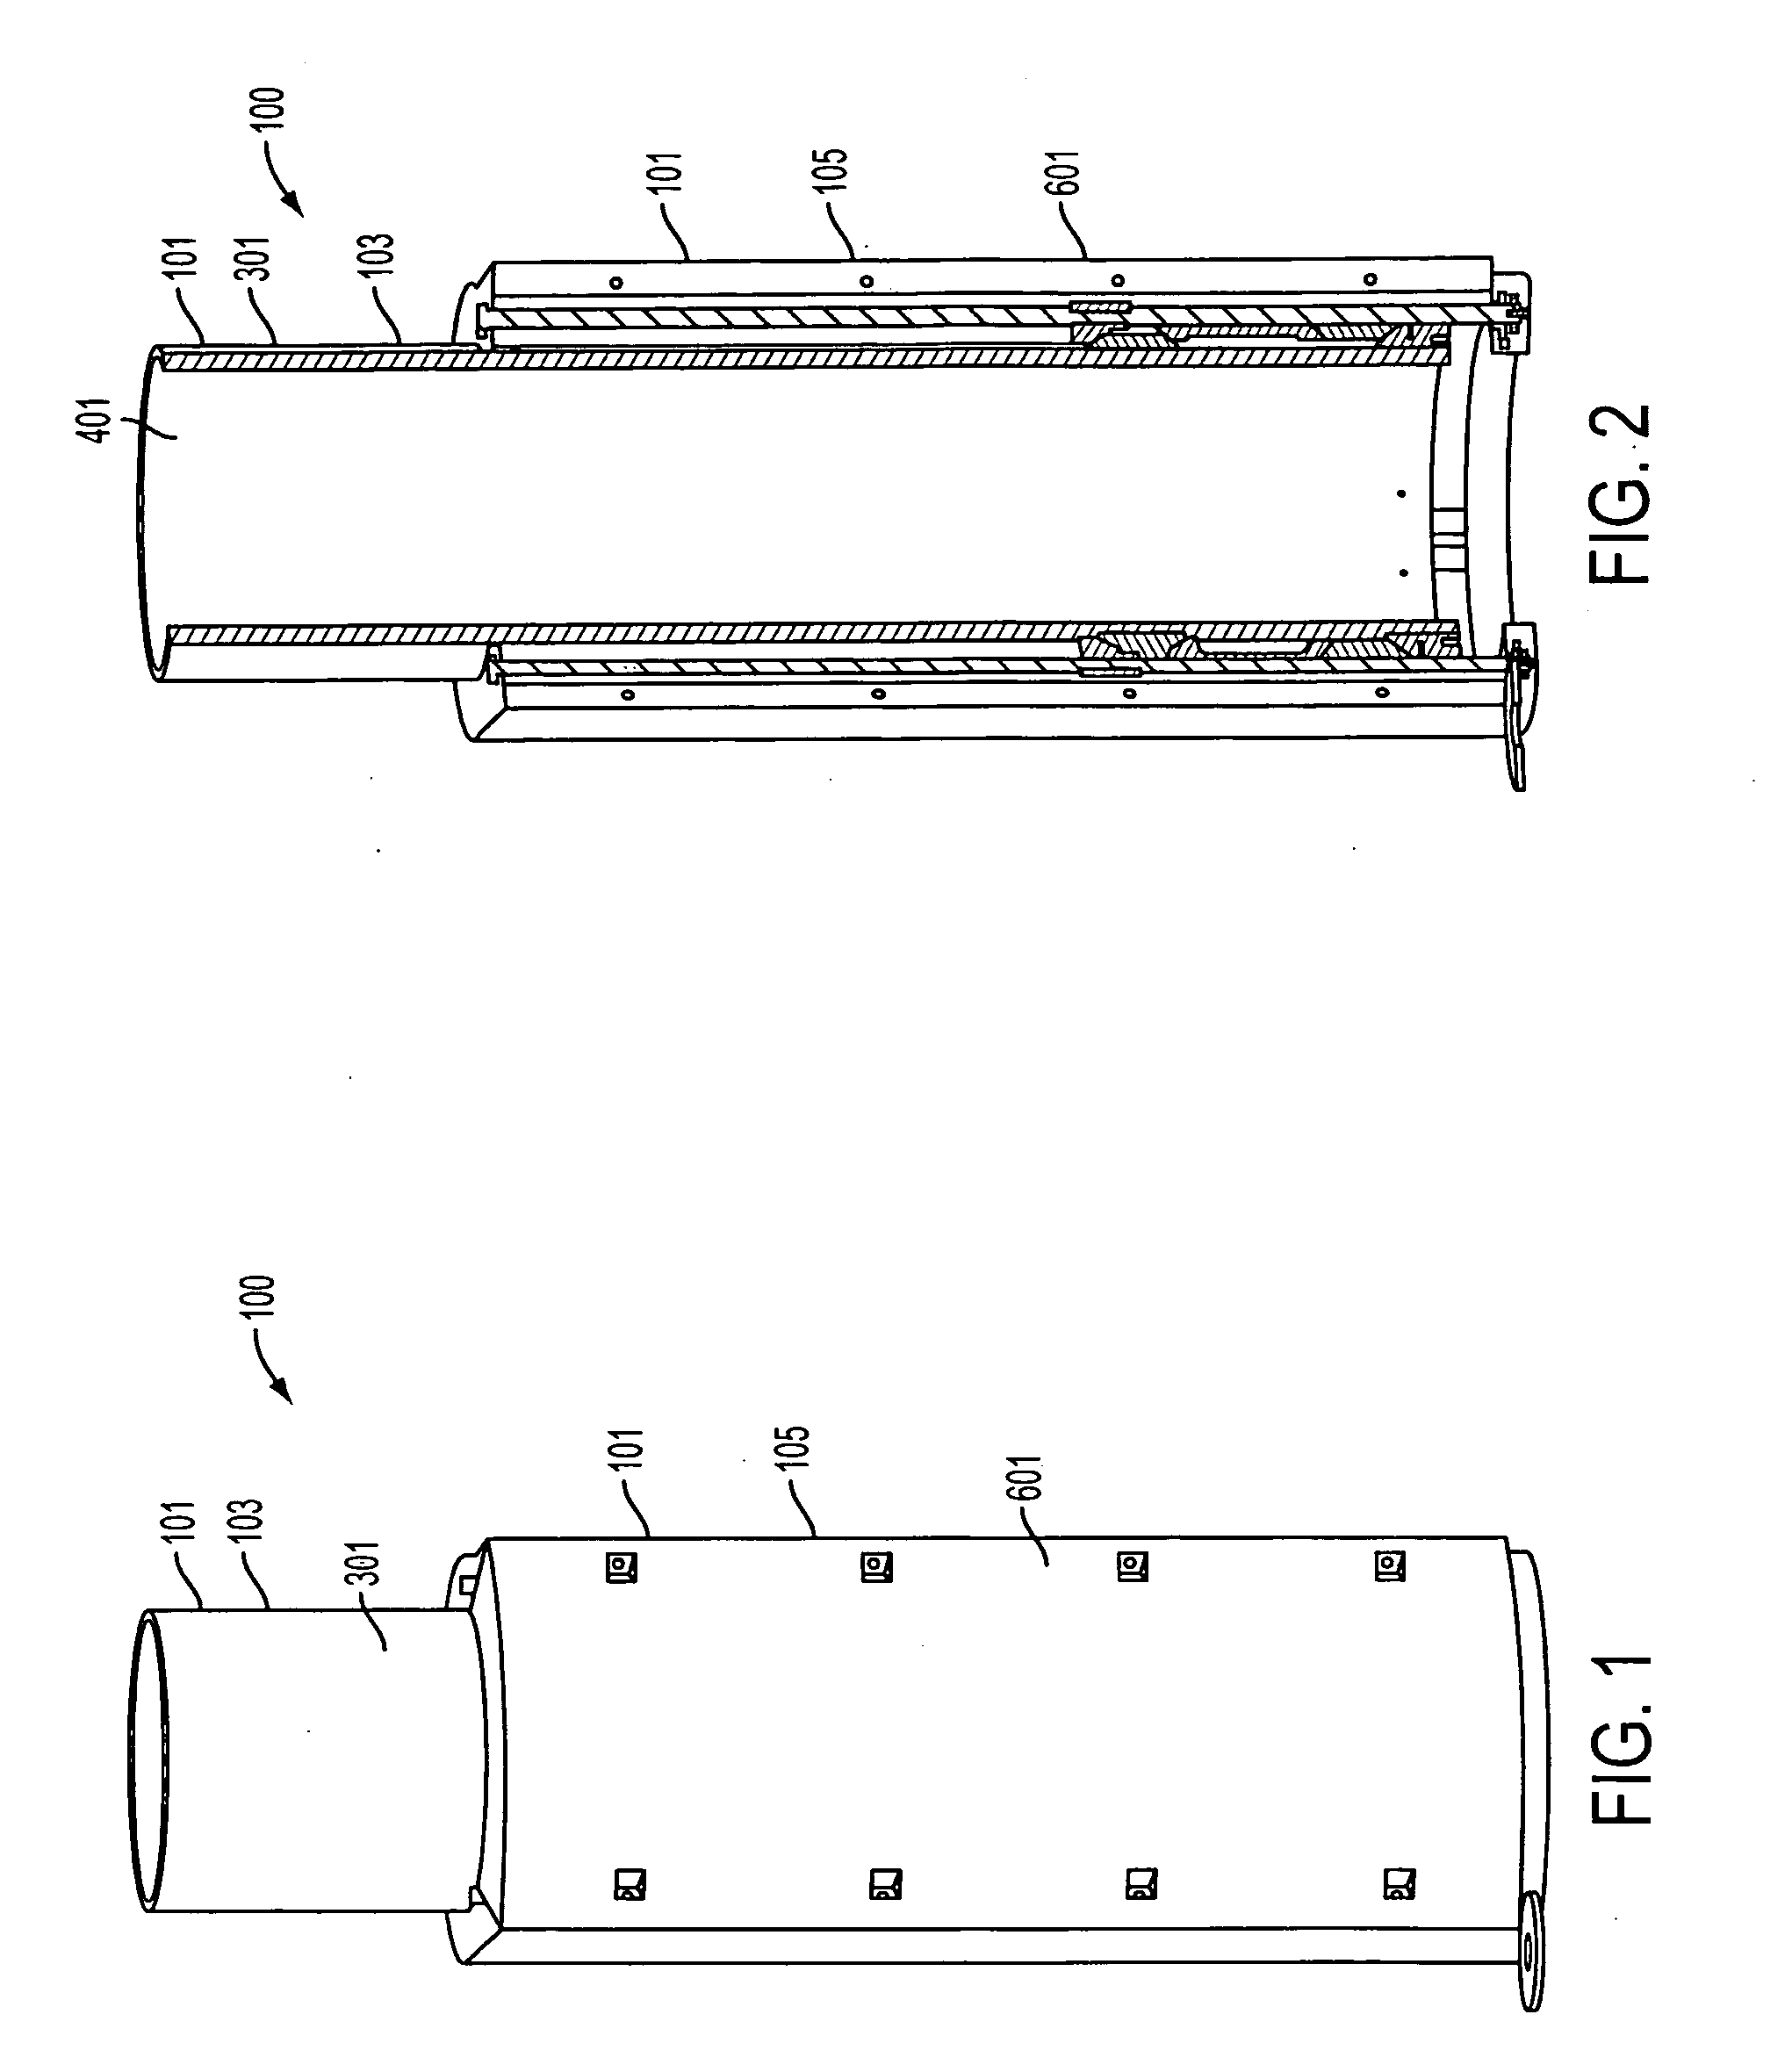 Telescoping mast having variable height locking and a chain erection mechanism with a cable management system